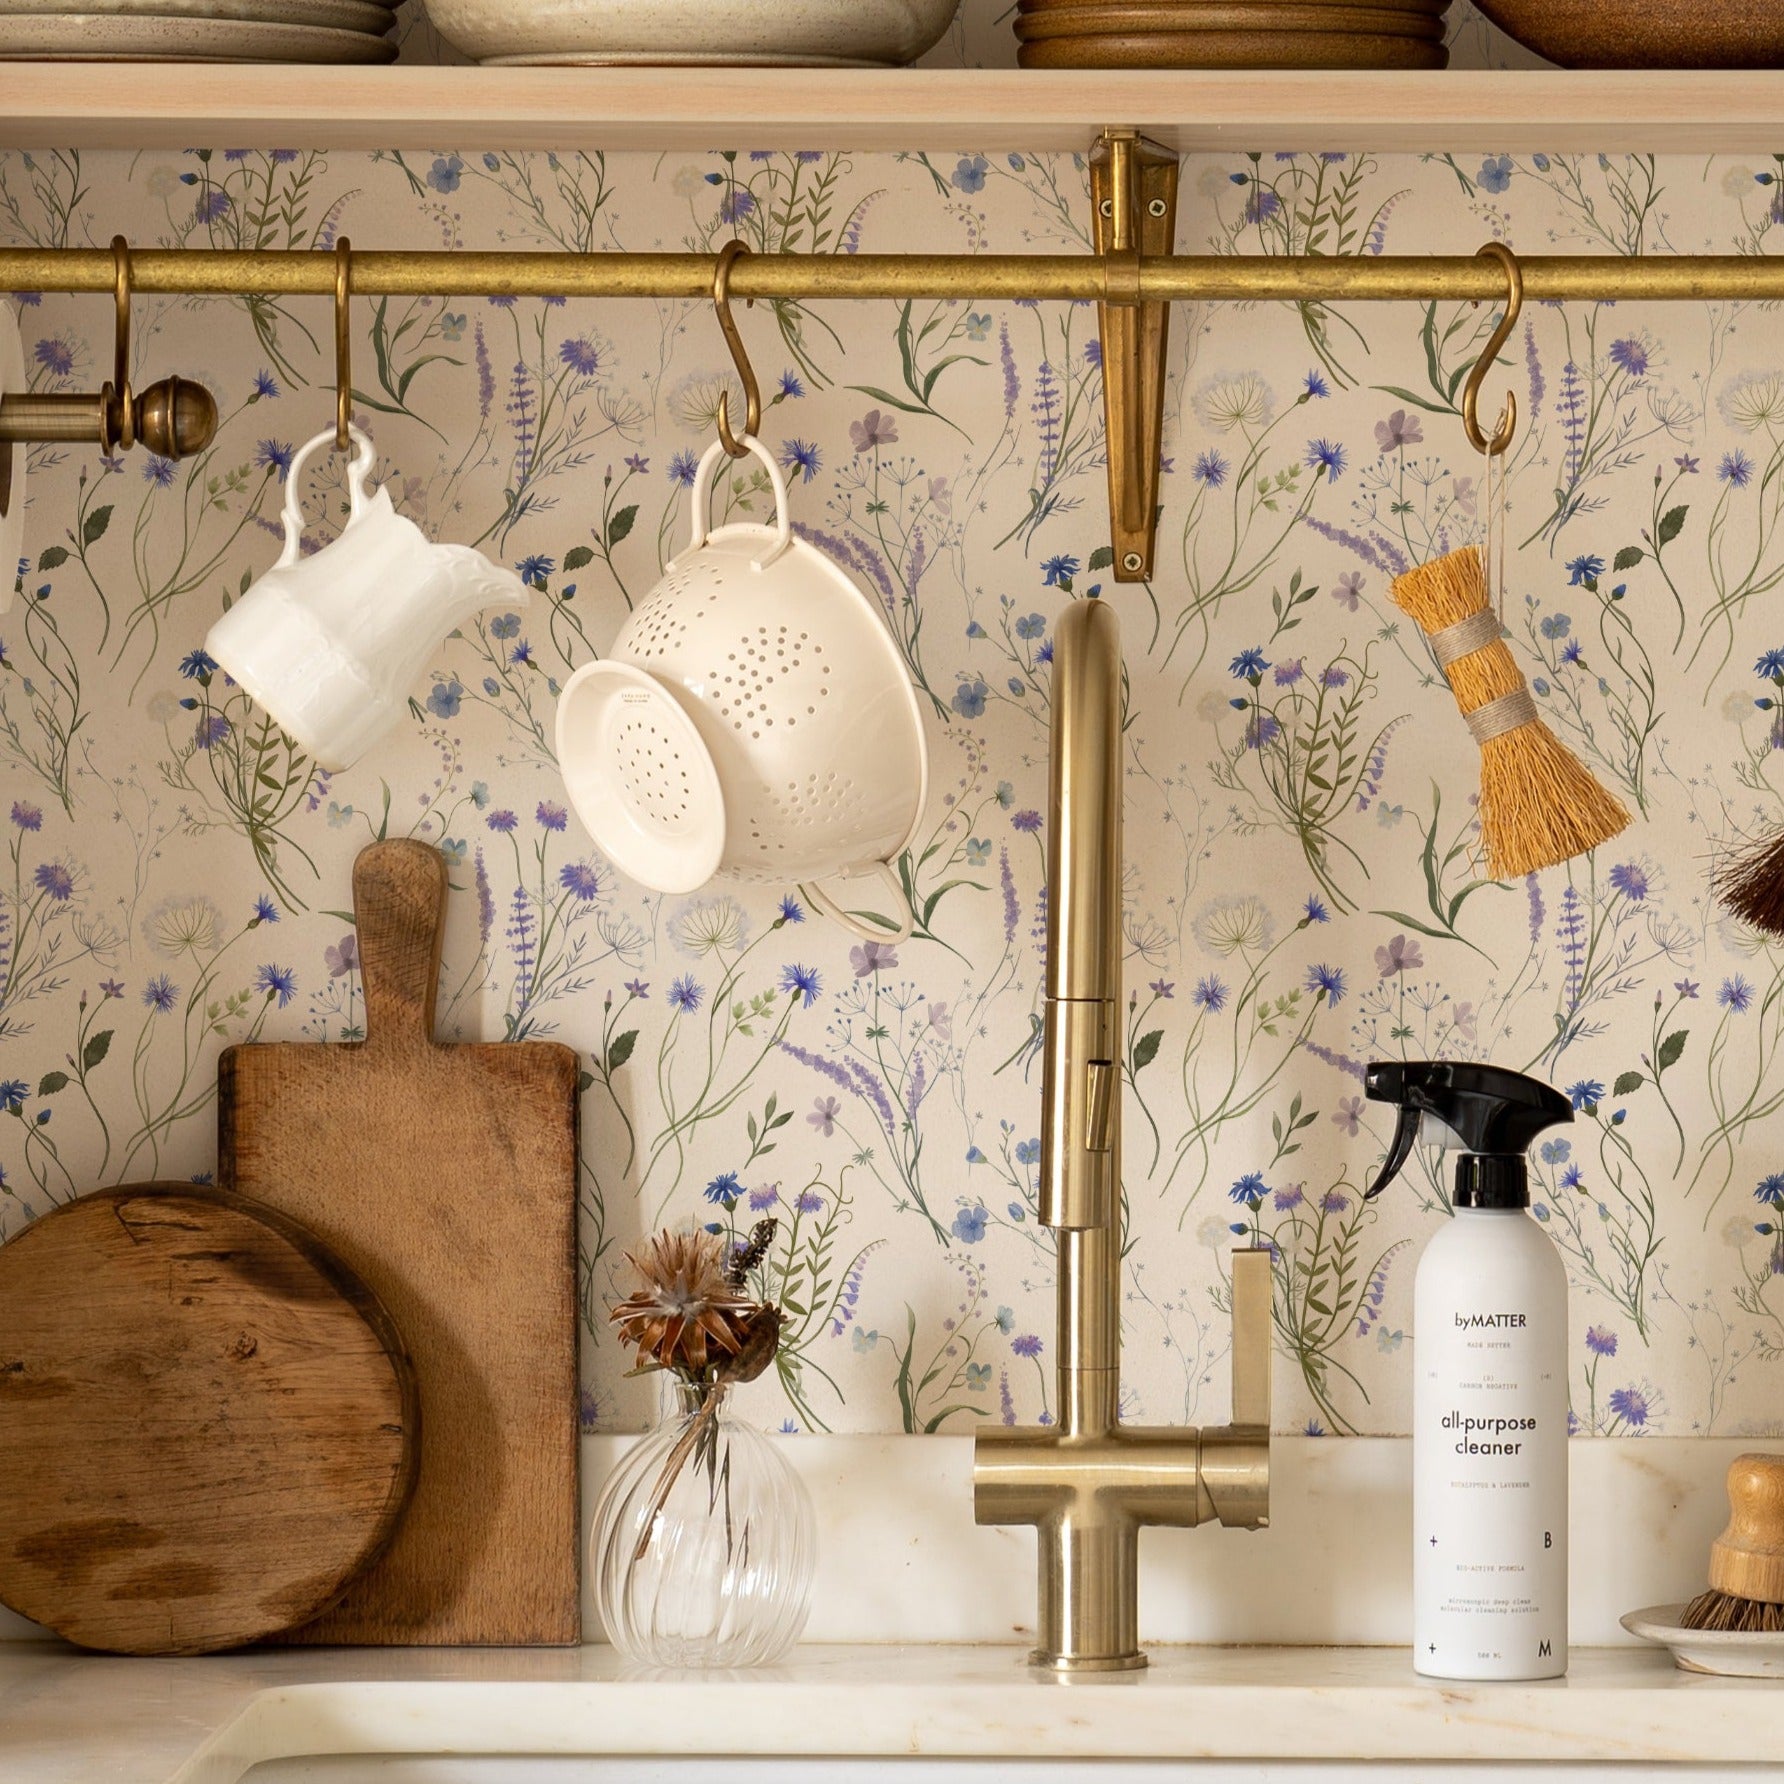 A charming kitchen setup enhanced by the Wildflower Bouquet Wallpaper. The wallpaper adds a burst of nature with its delicate floral design, paired beautifully with rustic kitchen accessories and utensils hanging against a floral backdrop.